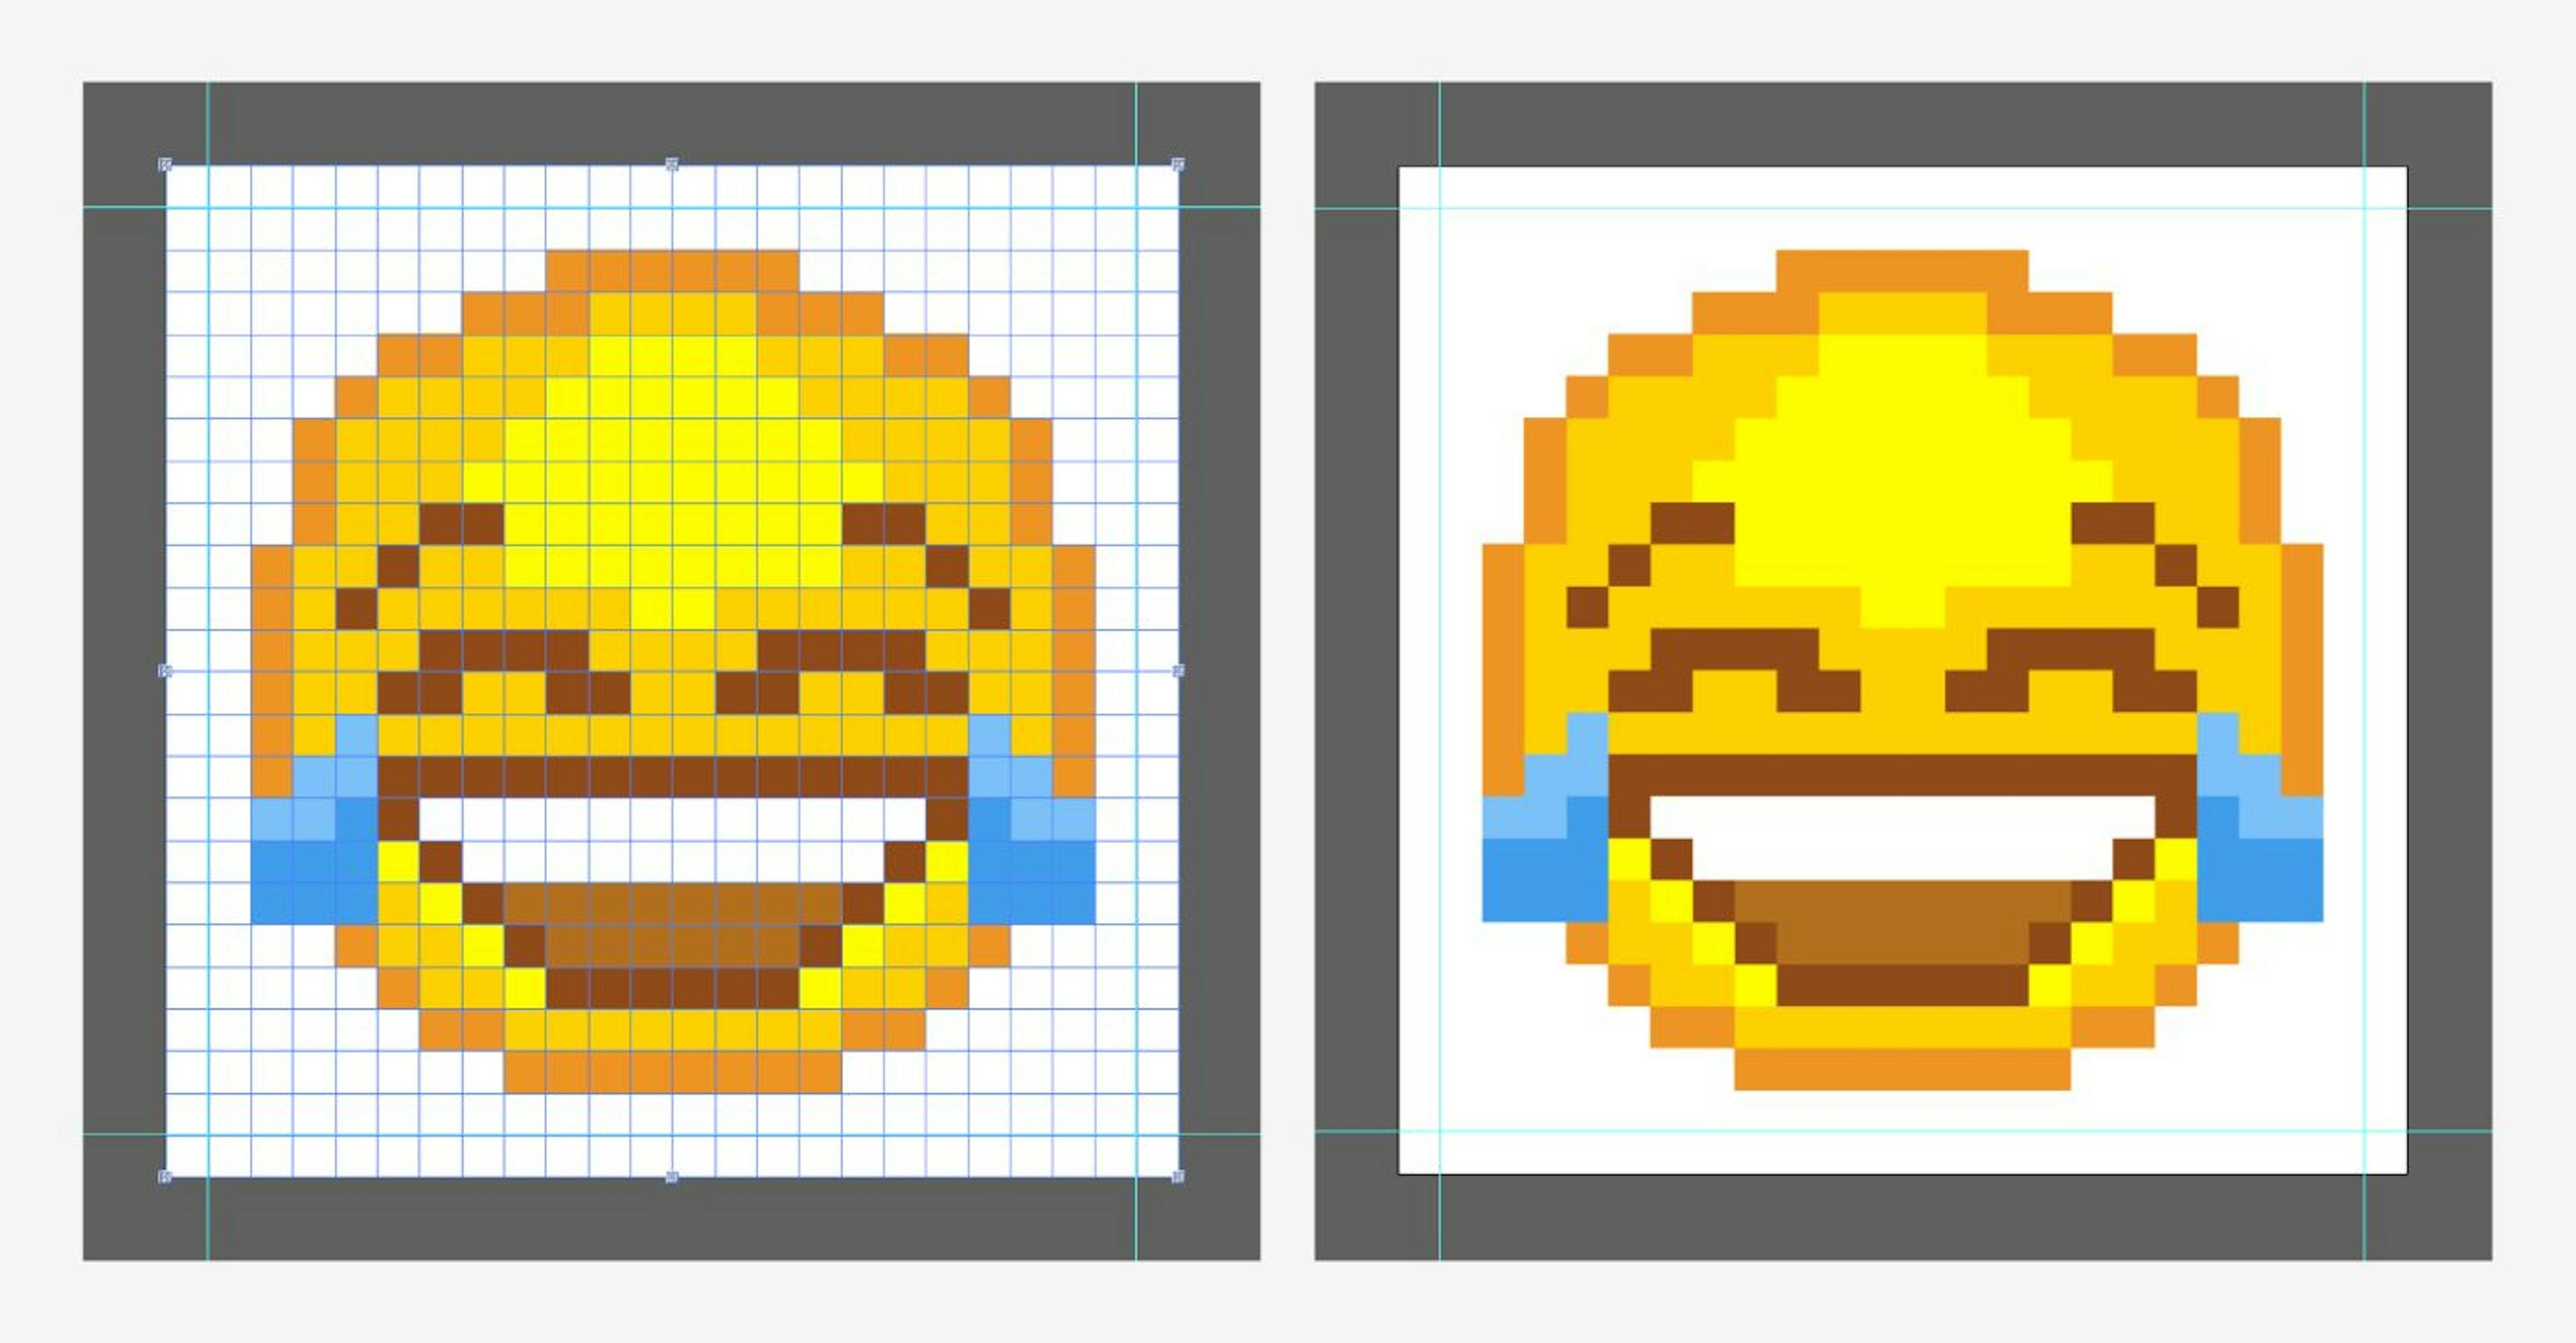 Added depth to the emoji, using highlights and shadows.